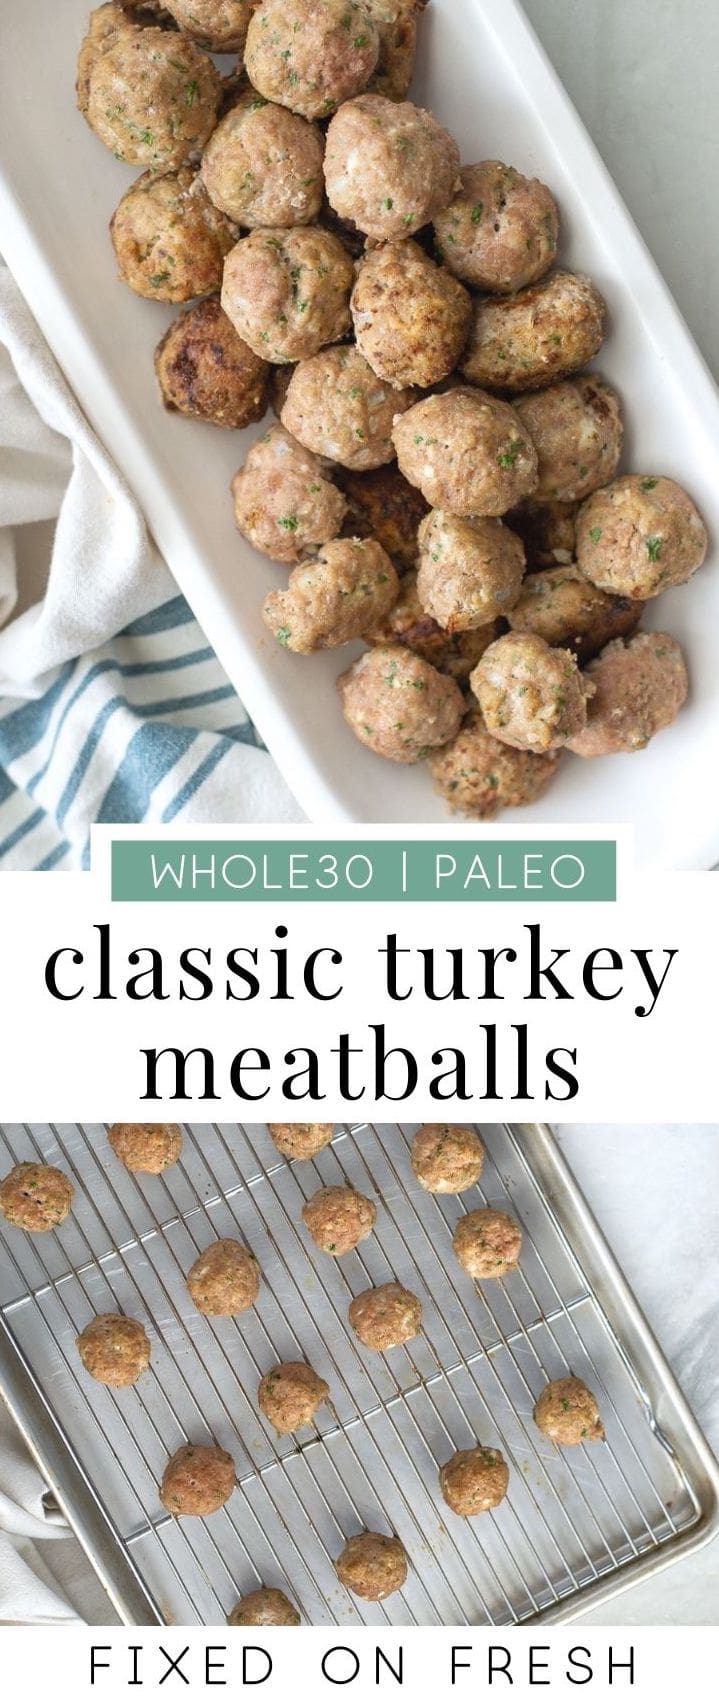 Classic Turkey Meatballs are easy to make, whole30, paleo and keto friendly since this recipe is without breadcrumbs. Serve these up with anything from veggie noodles to mashed potatoes for healthy dinner or meal prep lunch! #whole30 #keto #paleo #protein